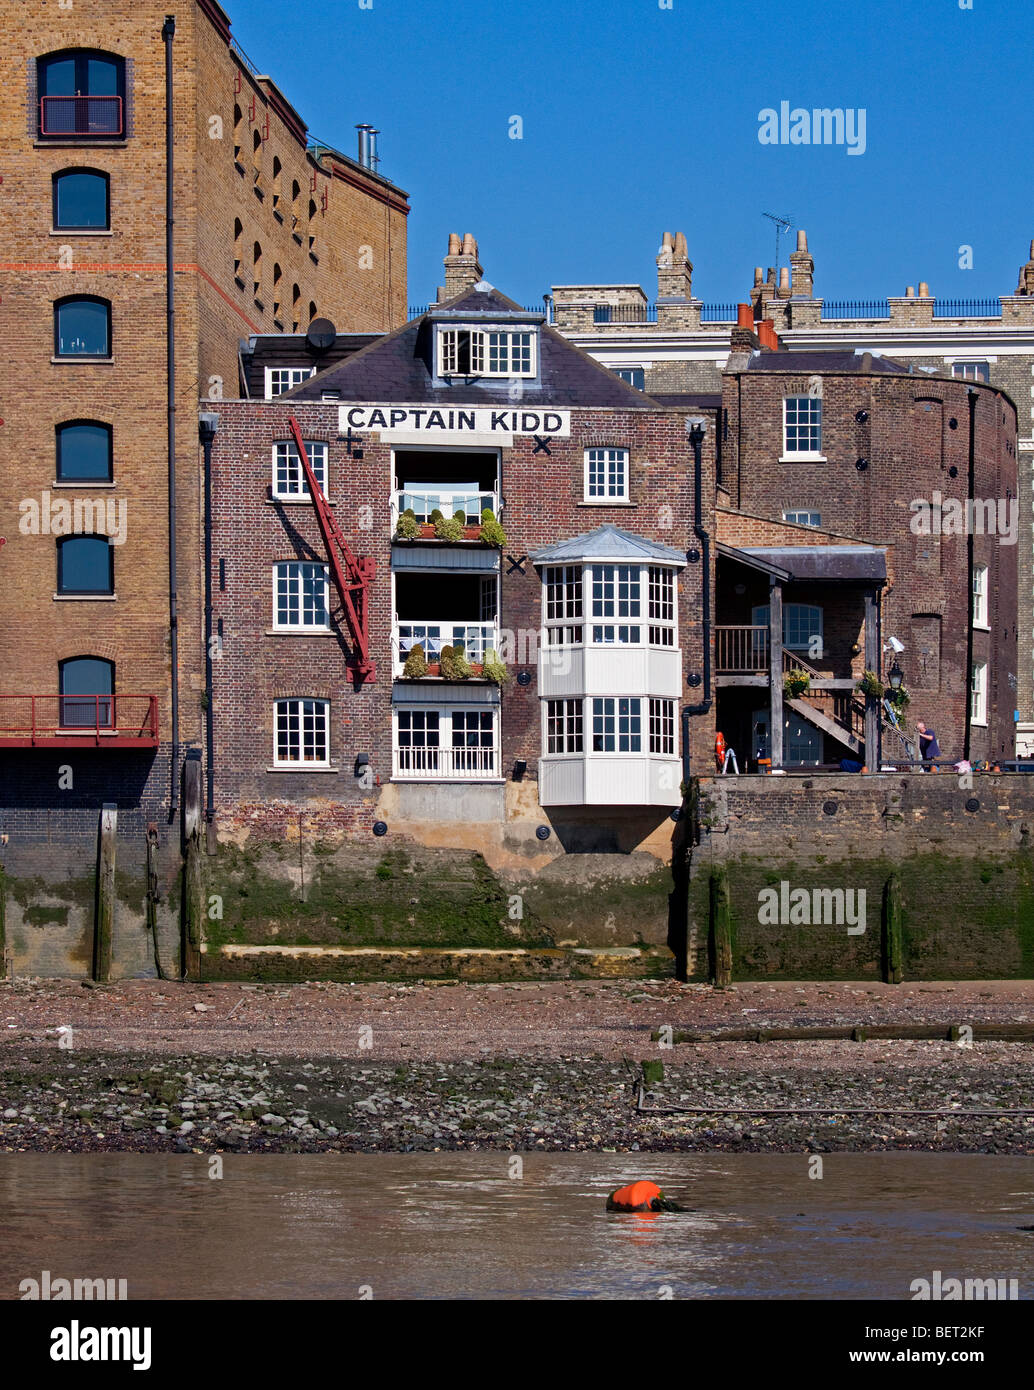 Captain Kidd Public House on the banks of the River Thames, Wapping, London, England Stock Photo